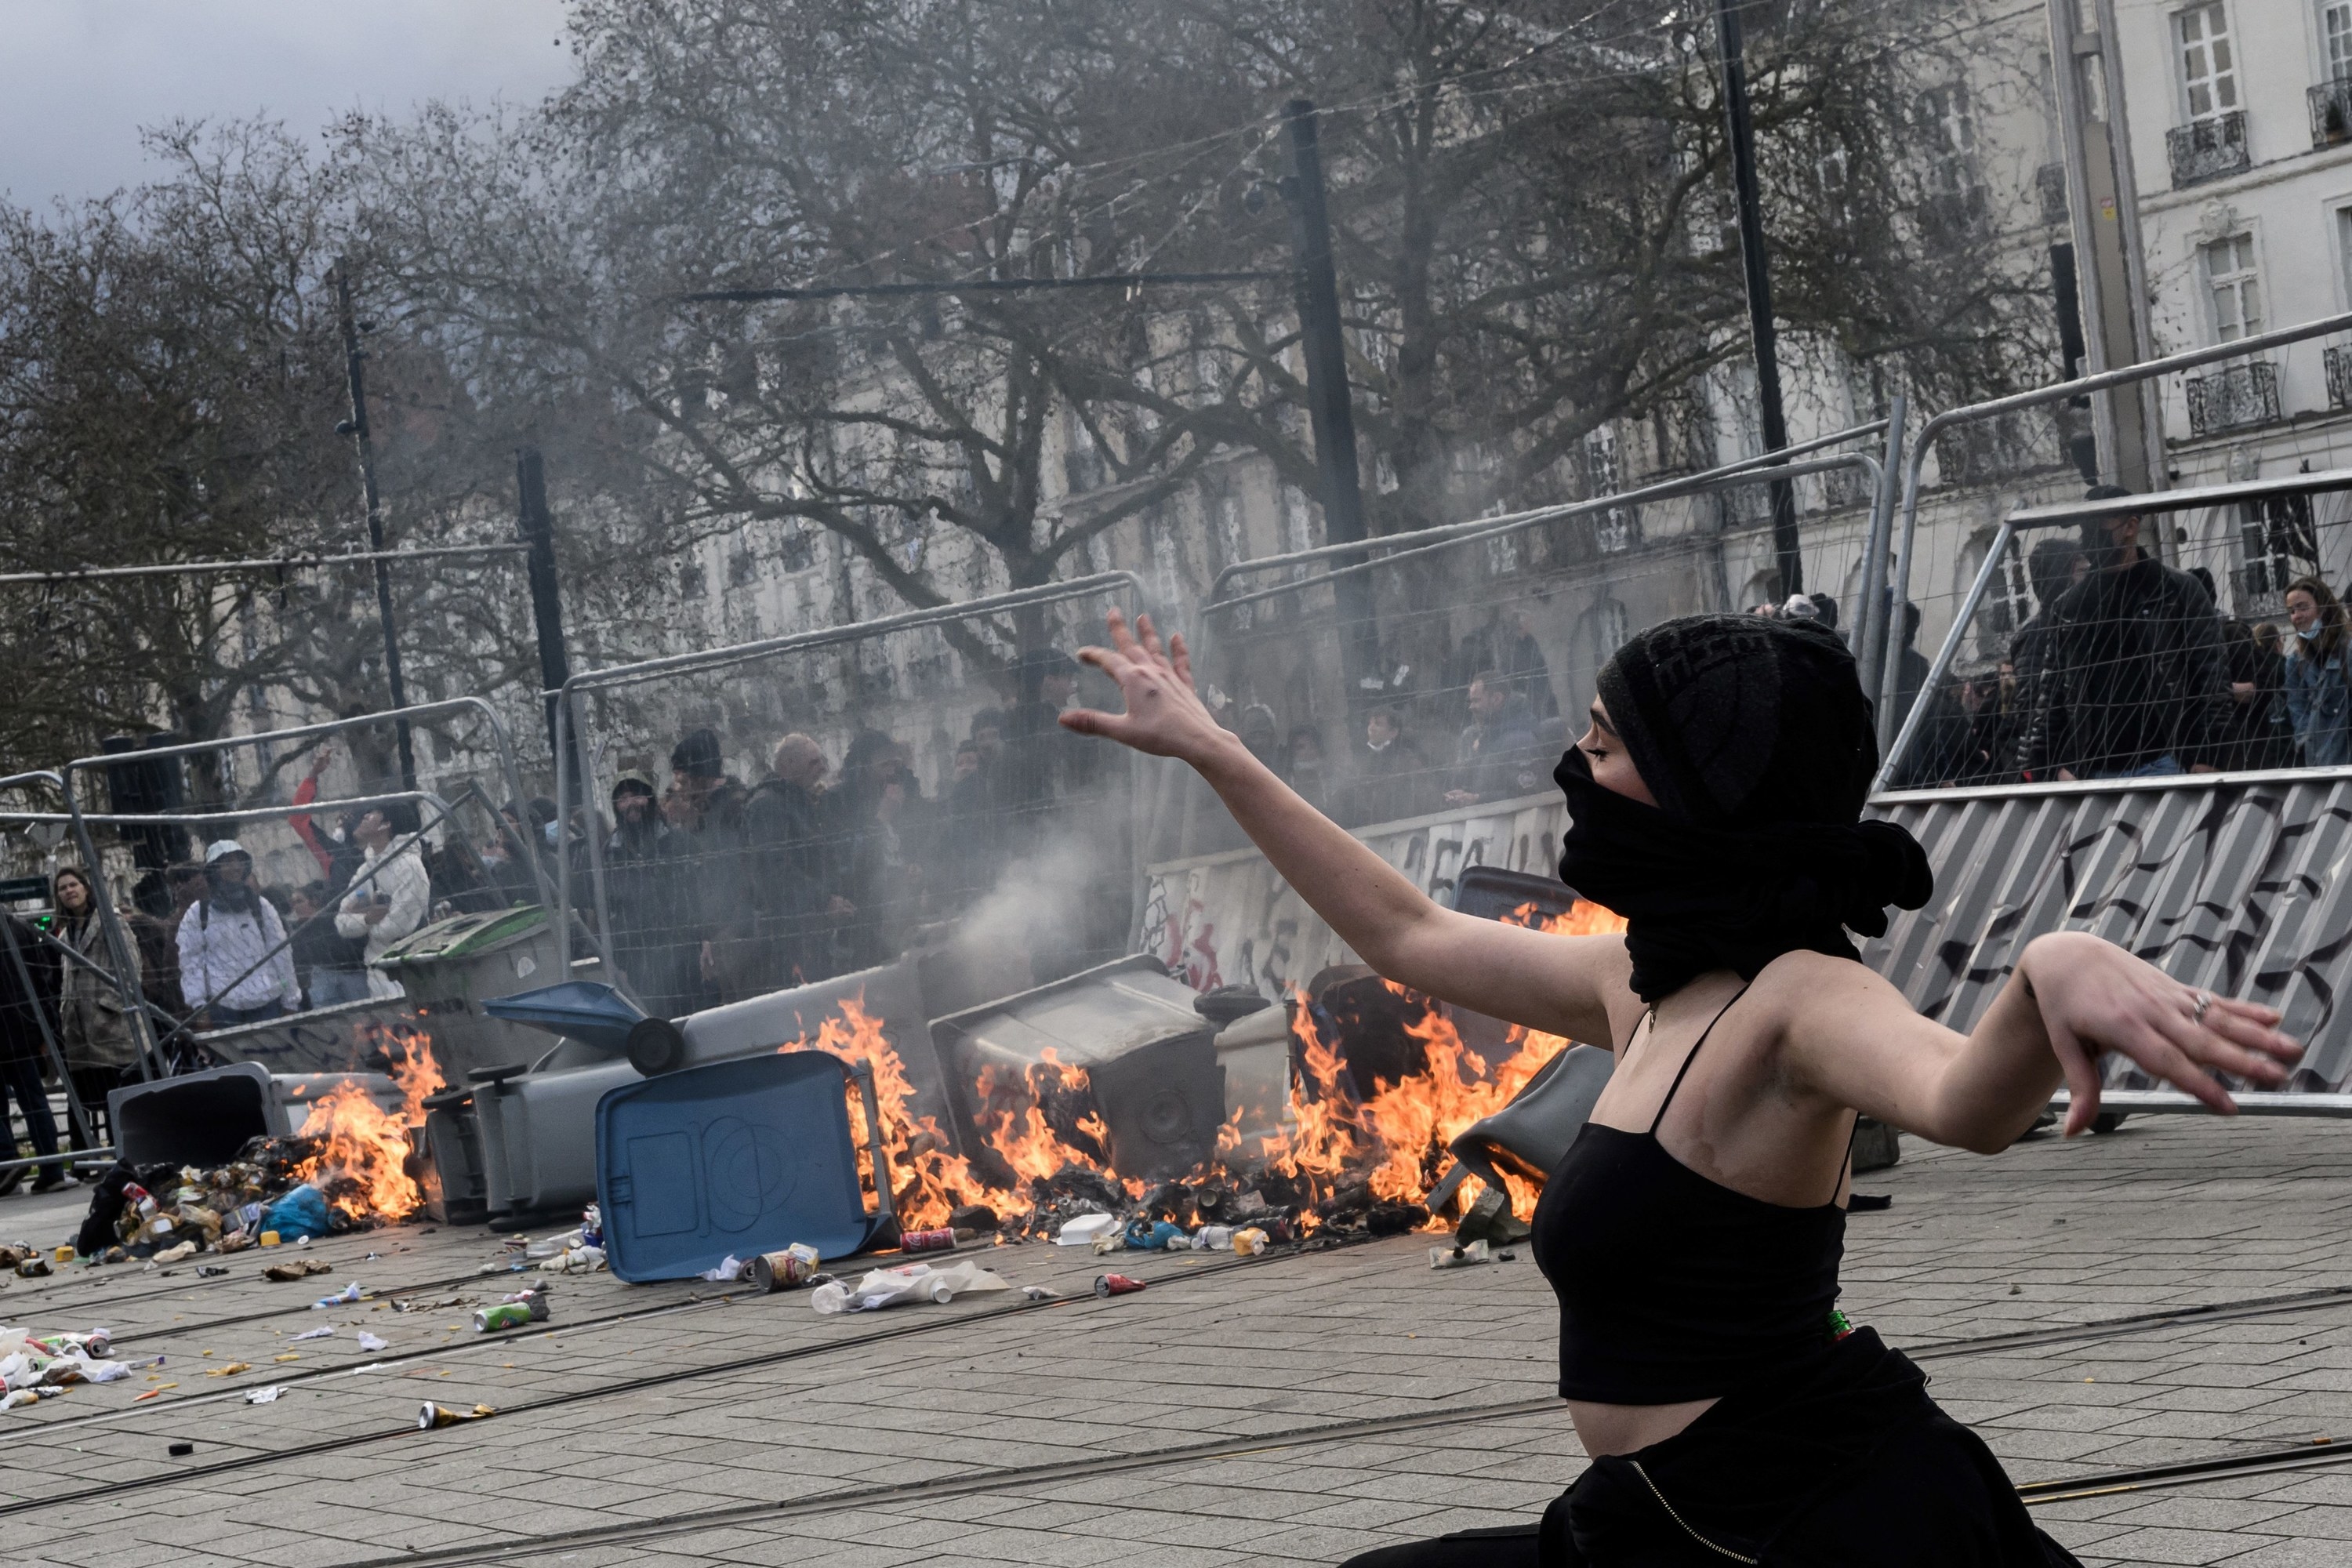 A person wearing a black head covering and mask to obscure their identity poses, as if dancing, in front of a flaming barricade